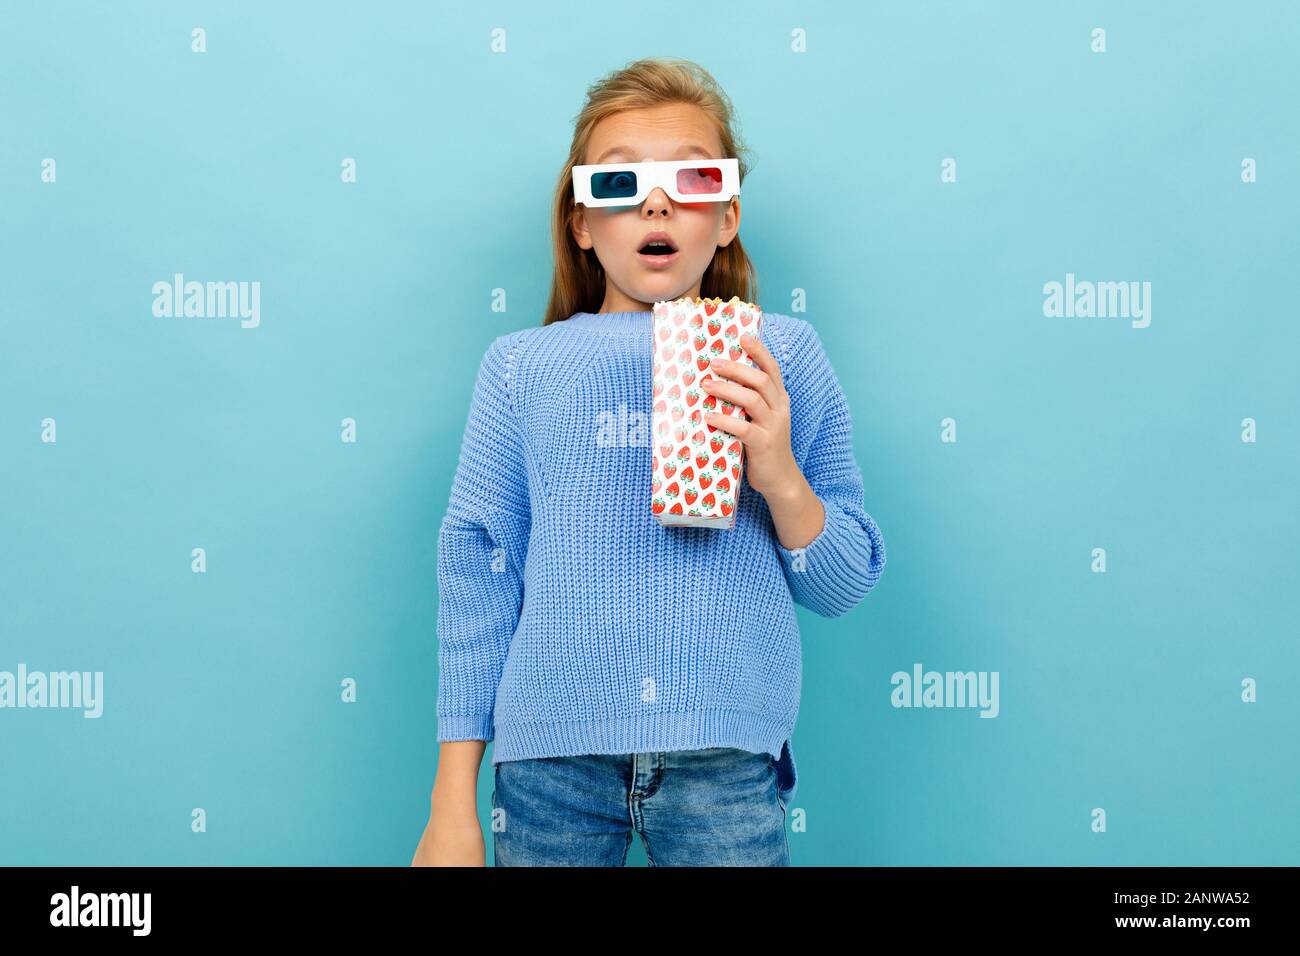 A girl with makeup and long brown hair, 3d glasses looks film or cartoon with popcorn Stock Photo